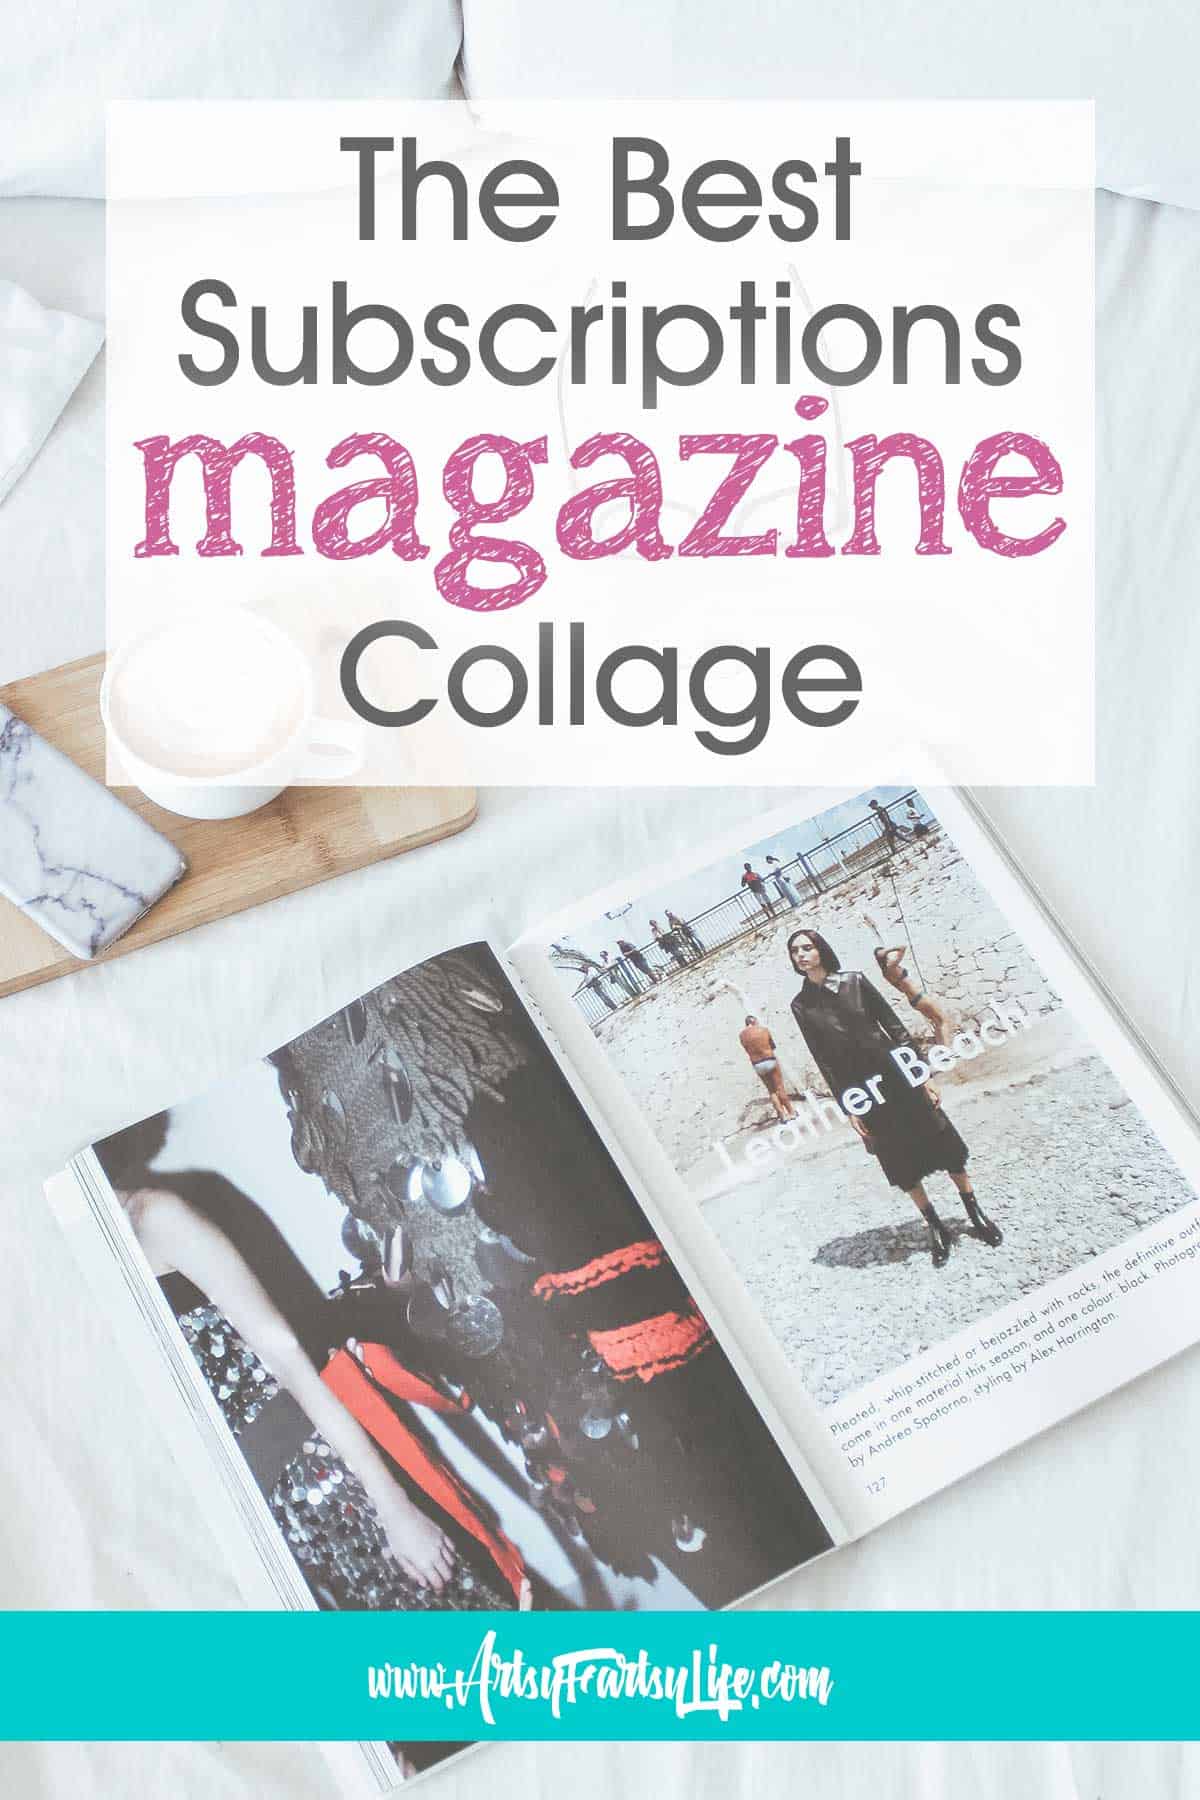 The Best Subscriptions For Magazine Collage · Artsy Fartsy Life